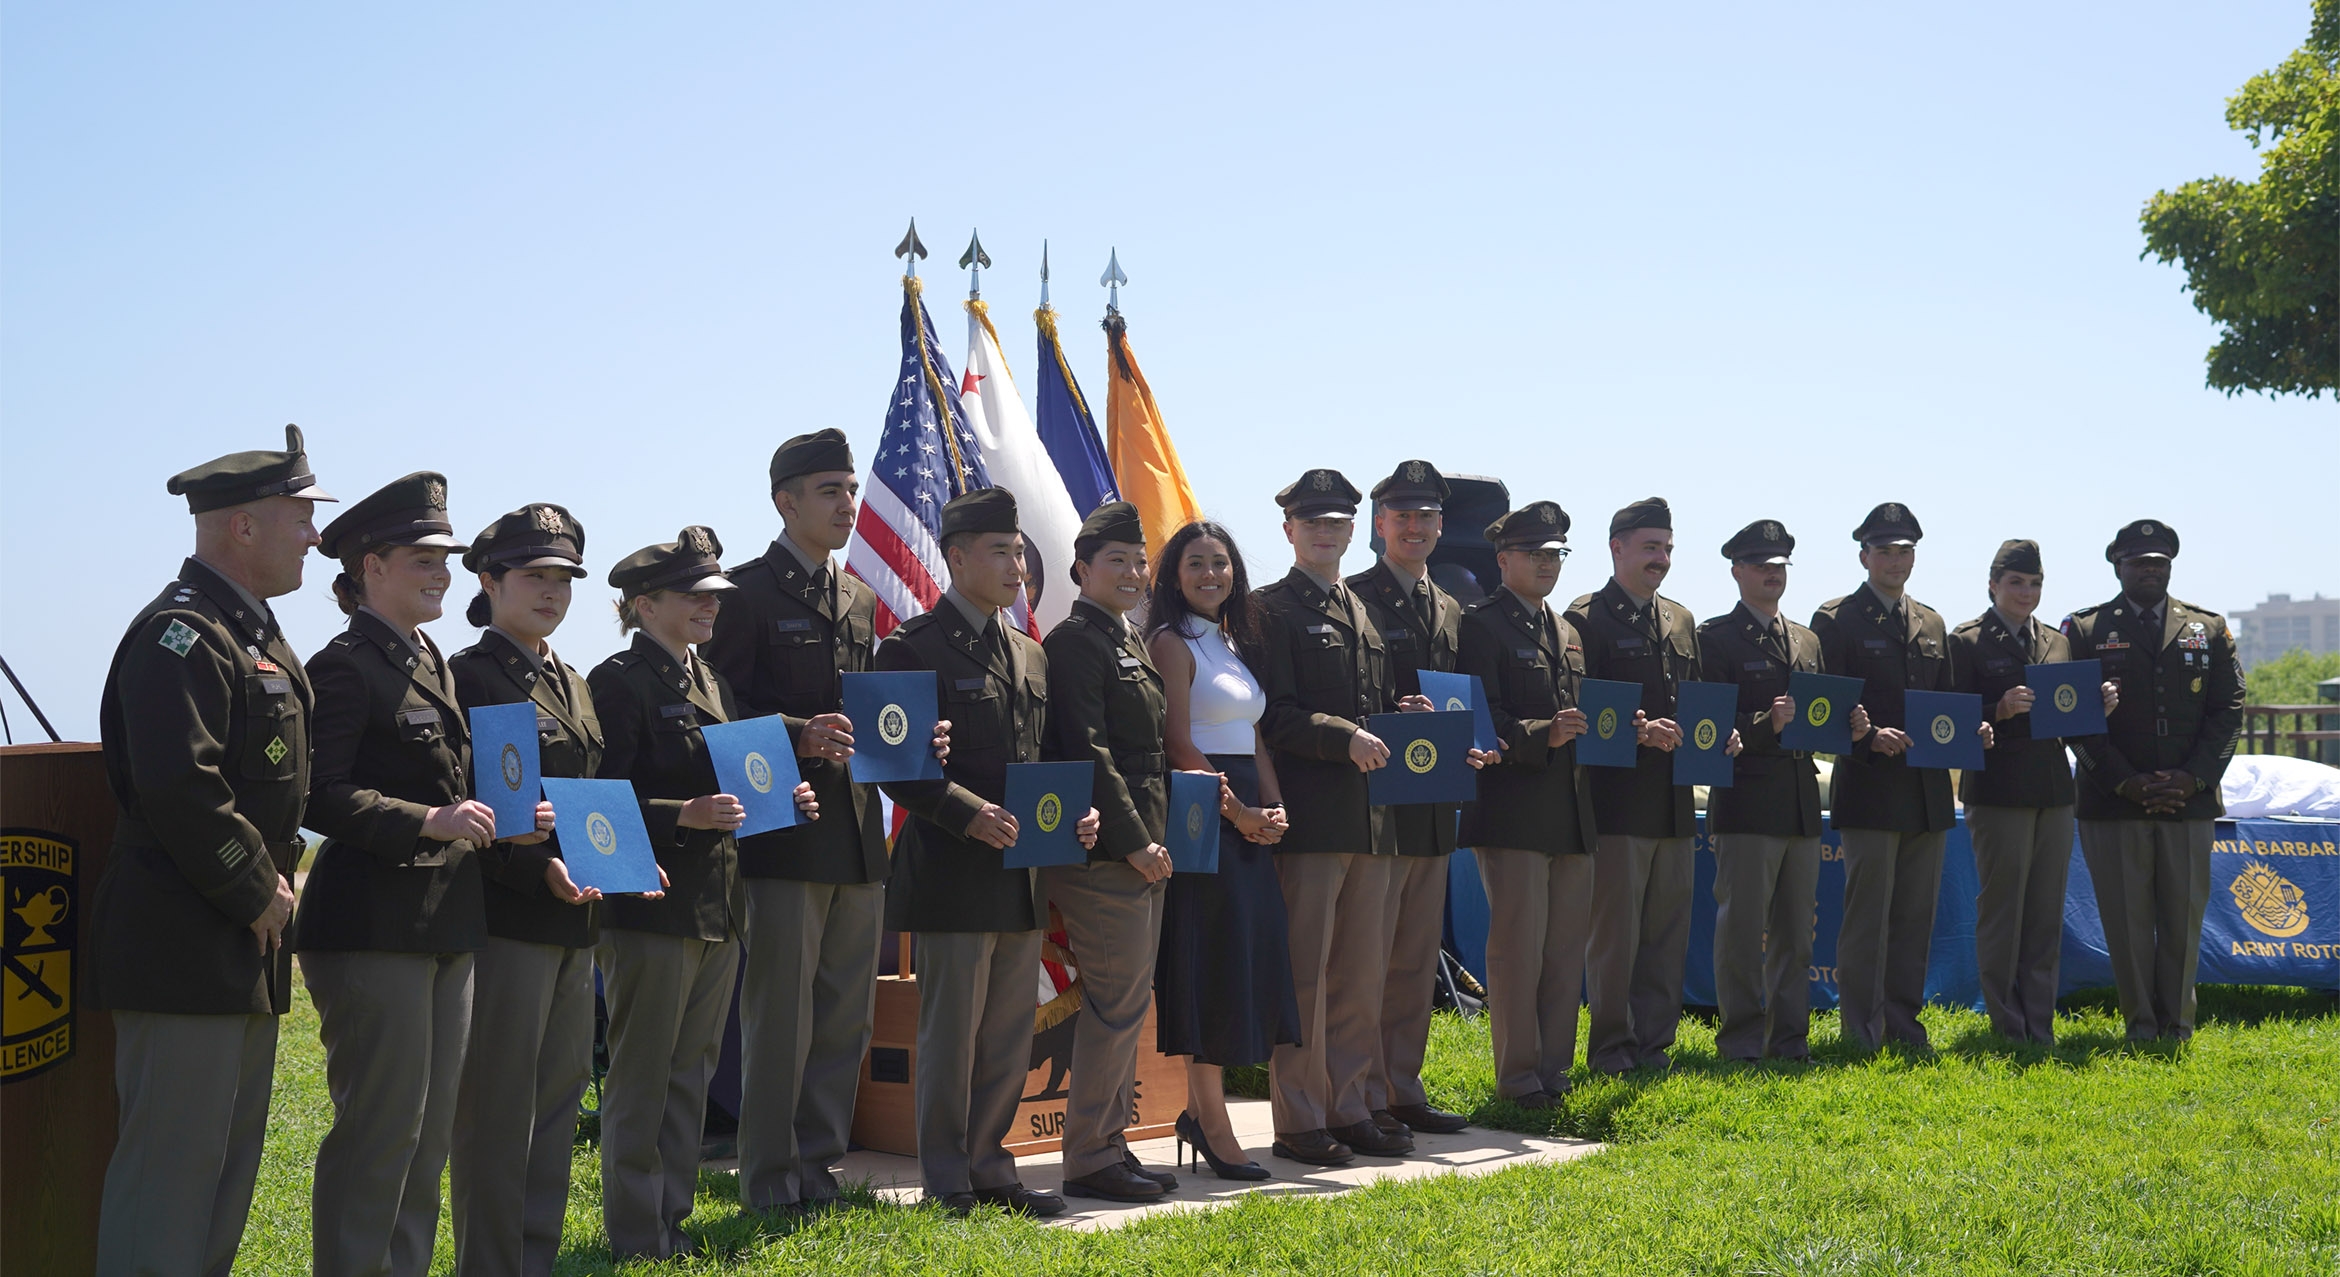 a color photograph group shot of 13 graduating cadets of UCSB's ROTC program